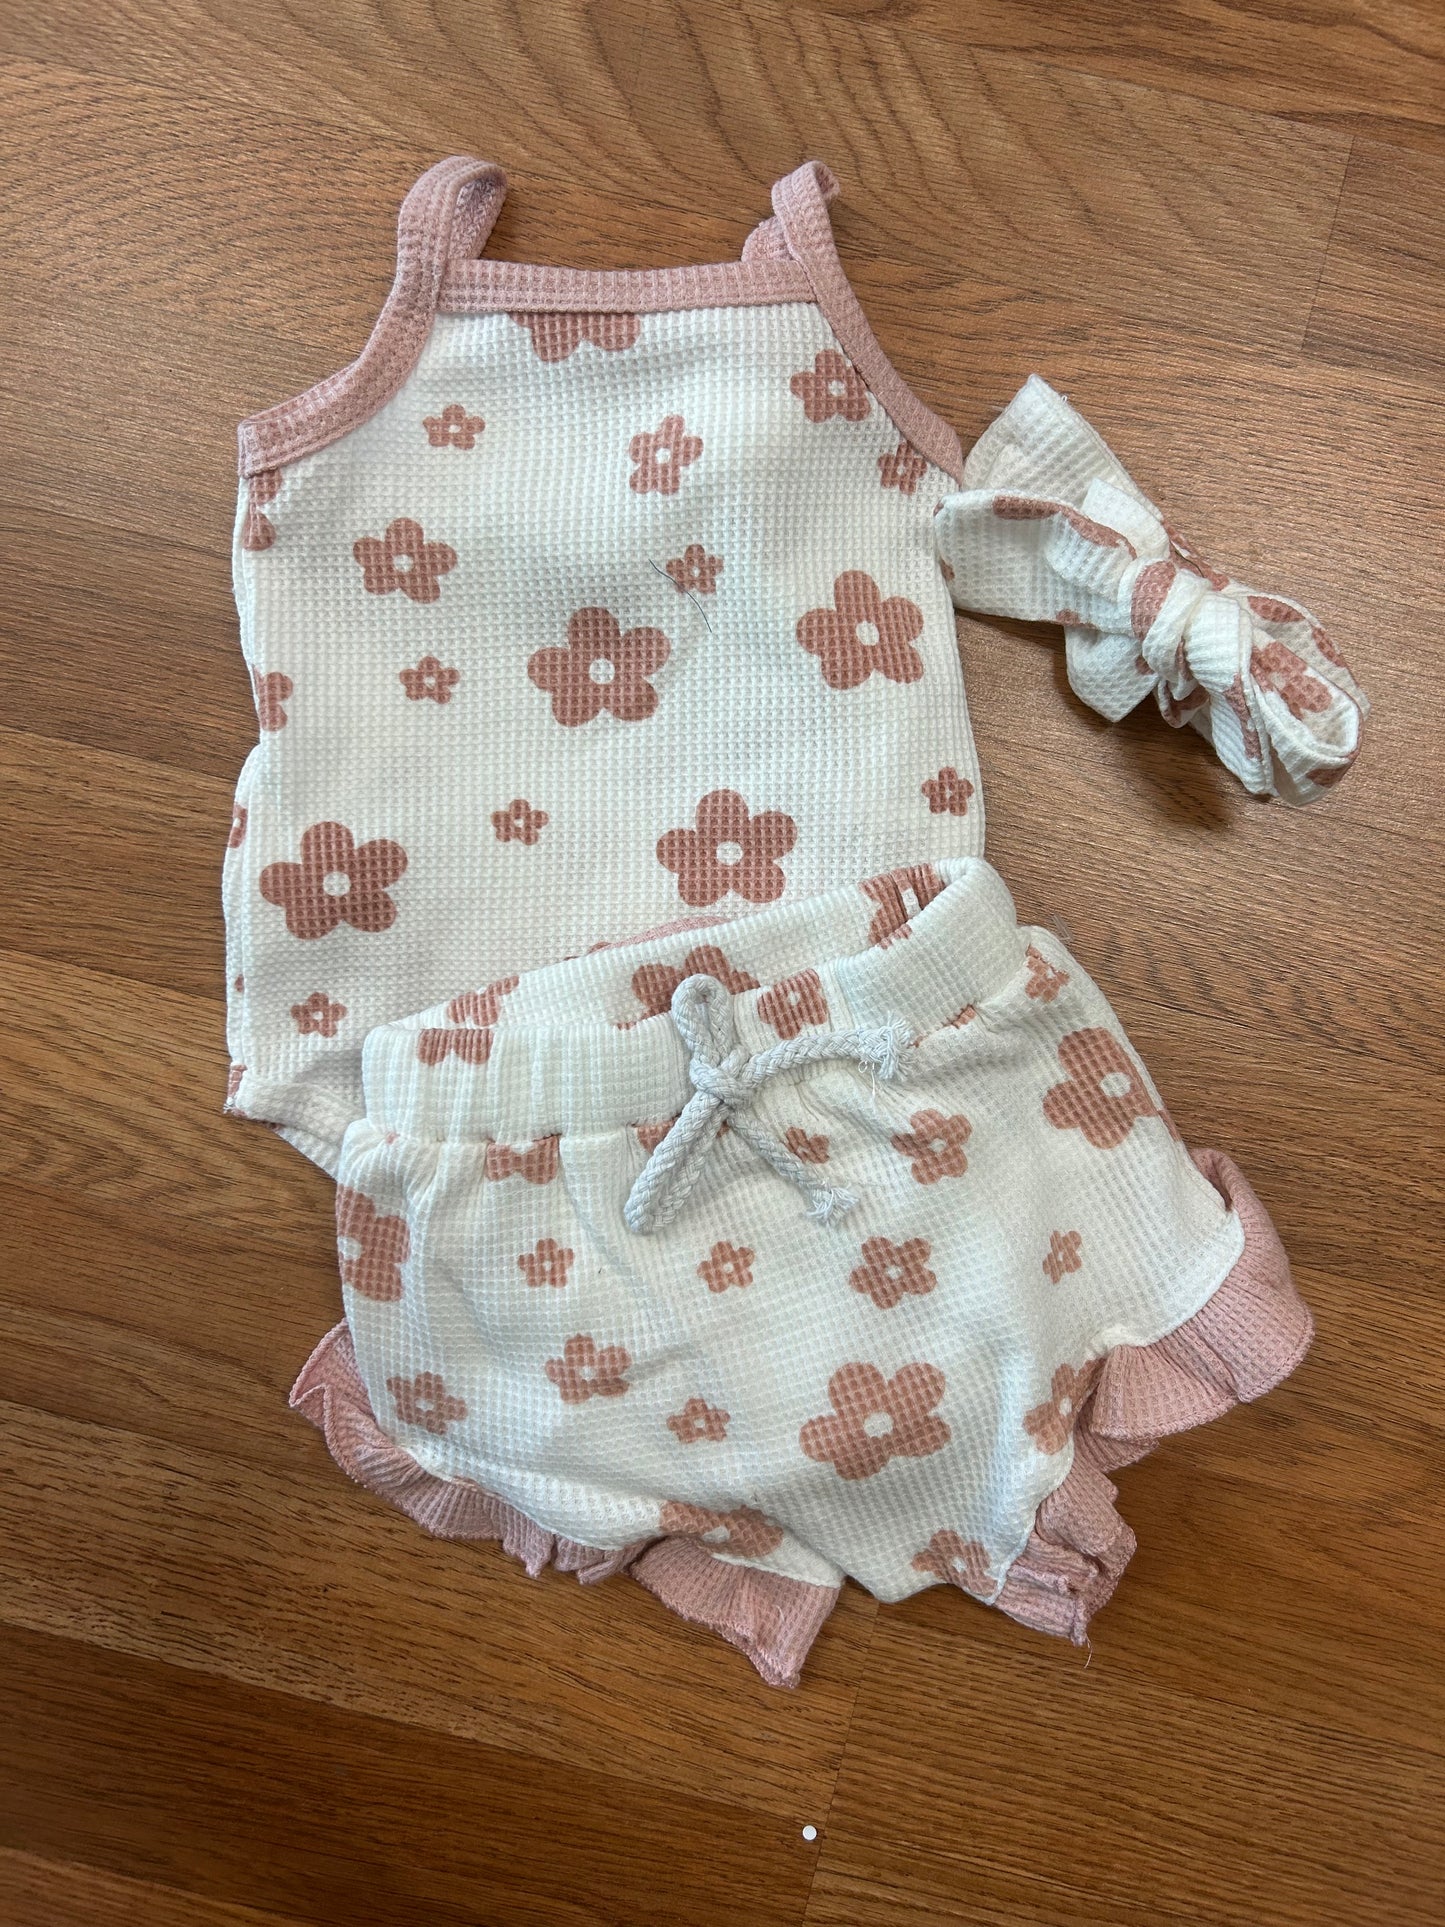 3 Piece Pink Daisy Baby Outfit